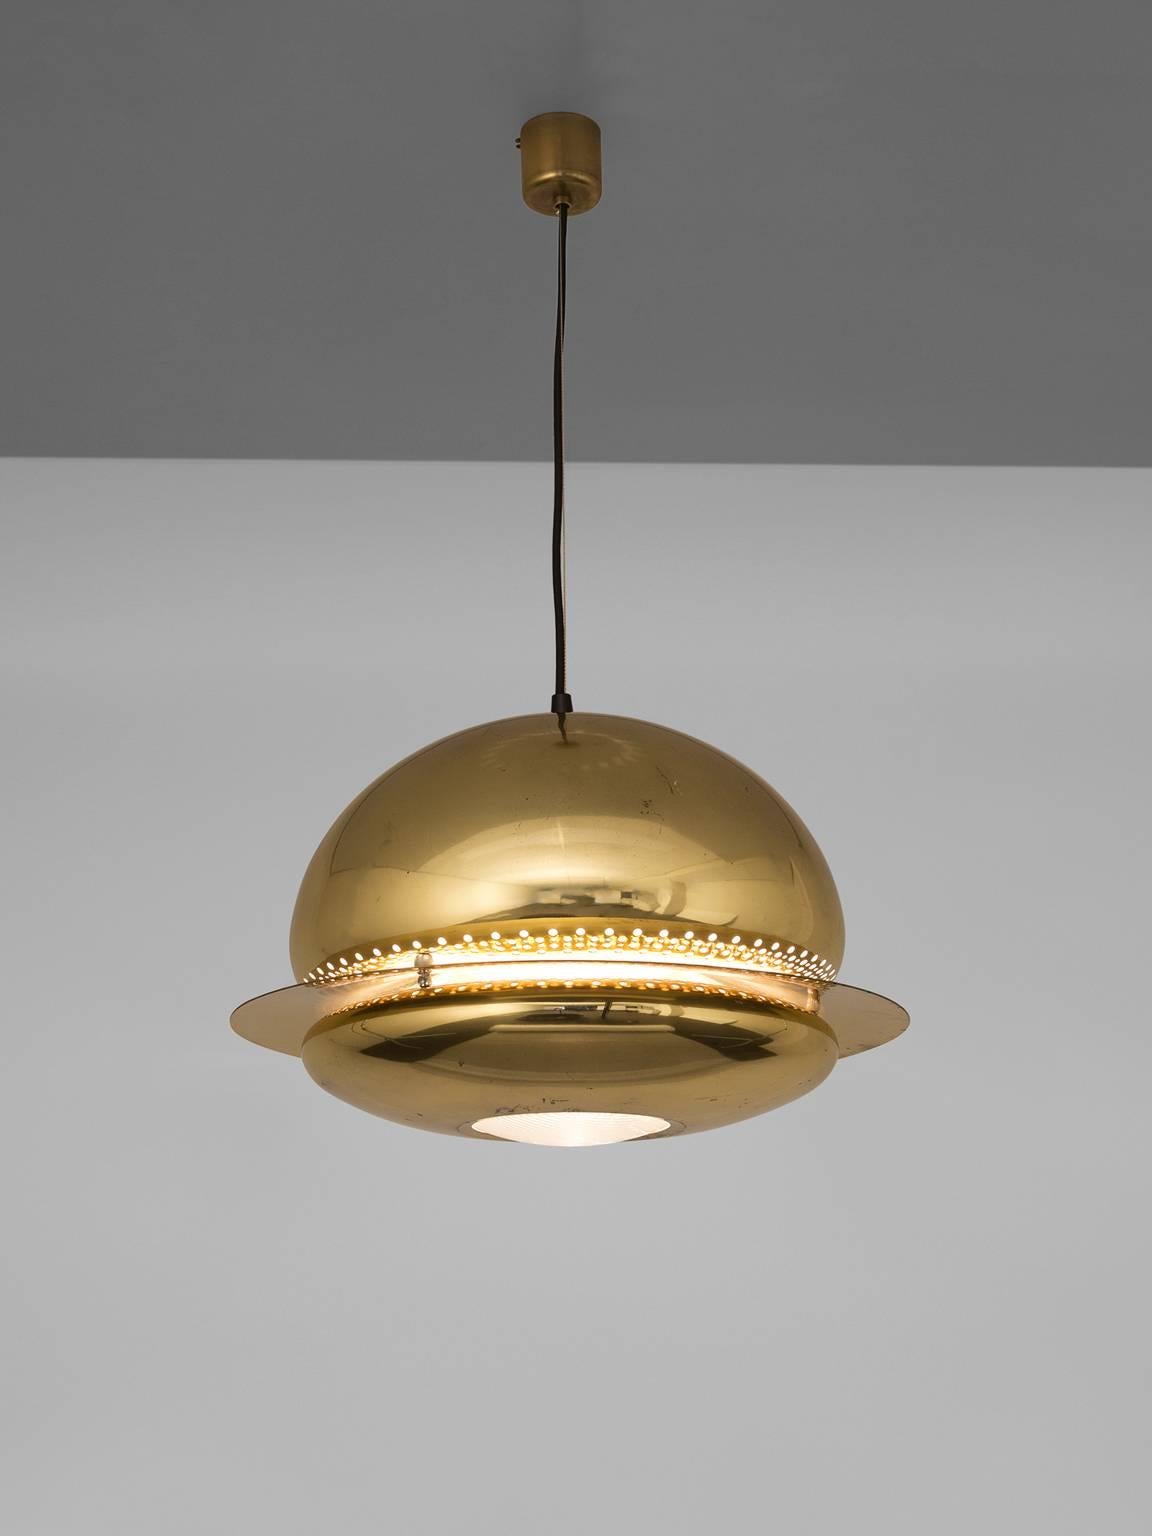 'Nictea' pendant in brass by Tobia Scarpa for Flos, Italy, 1960s.

This elegant lamp has a wonderful light partition, due to the two layers. The upper part is a smoothly curved half bowl, with holes in the suface. The upper part is connected to